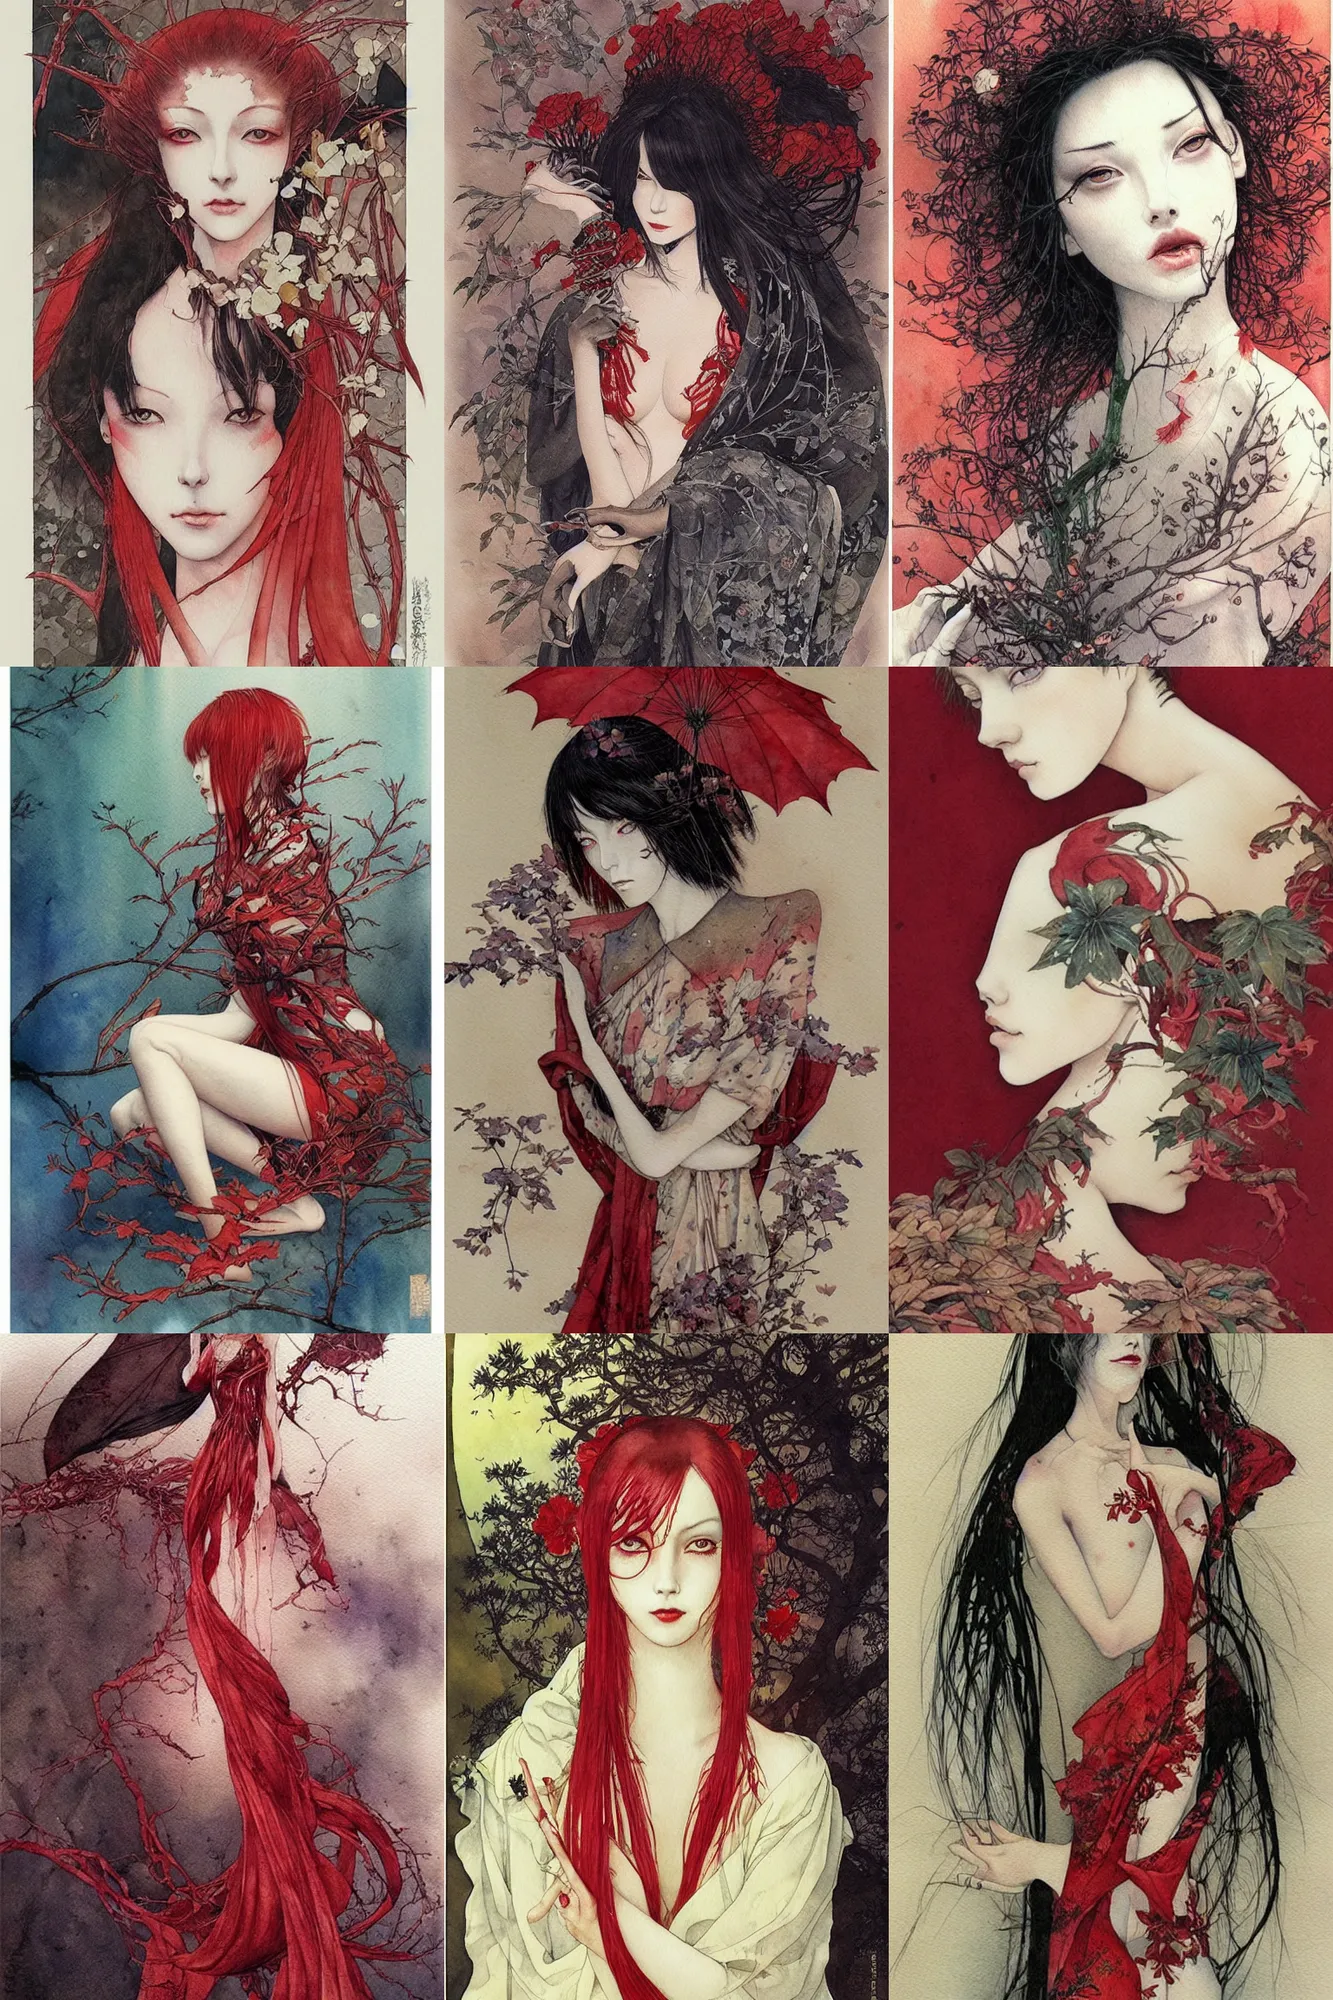 Prompt: watercolor painting of a beatiful woman by brain froud, dave dorman, takato yamamoto, red